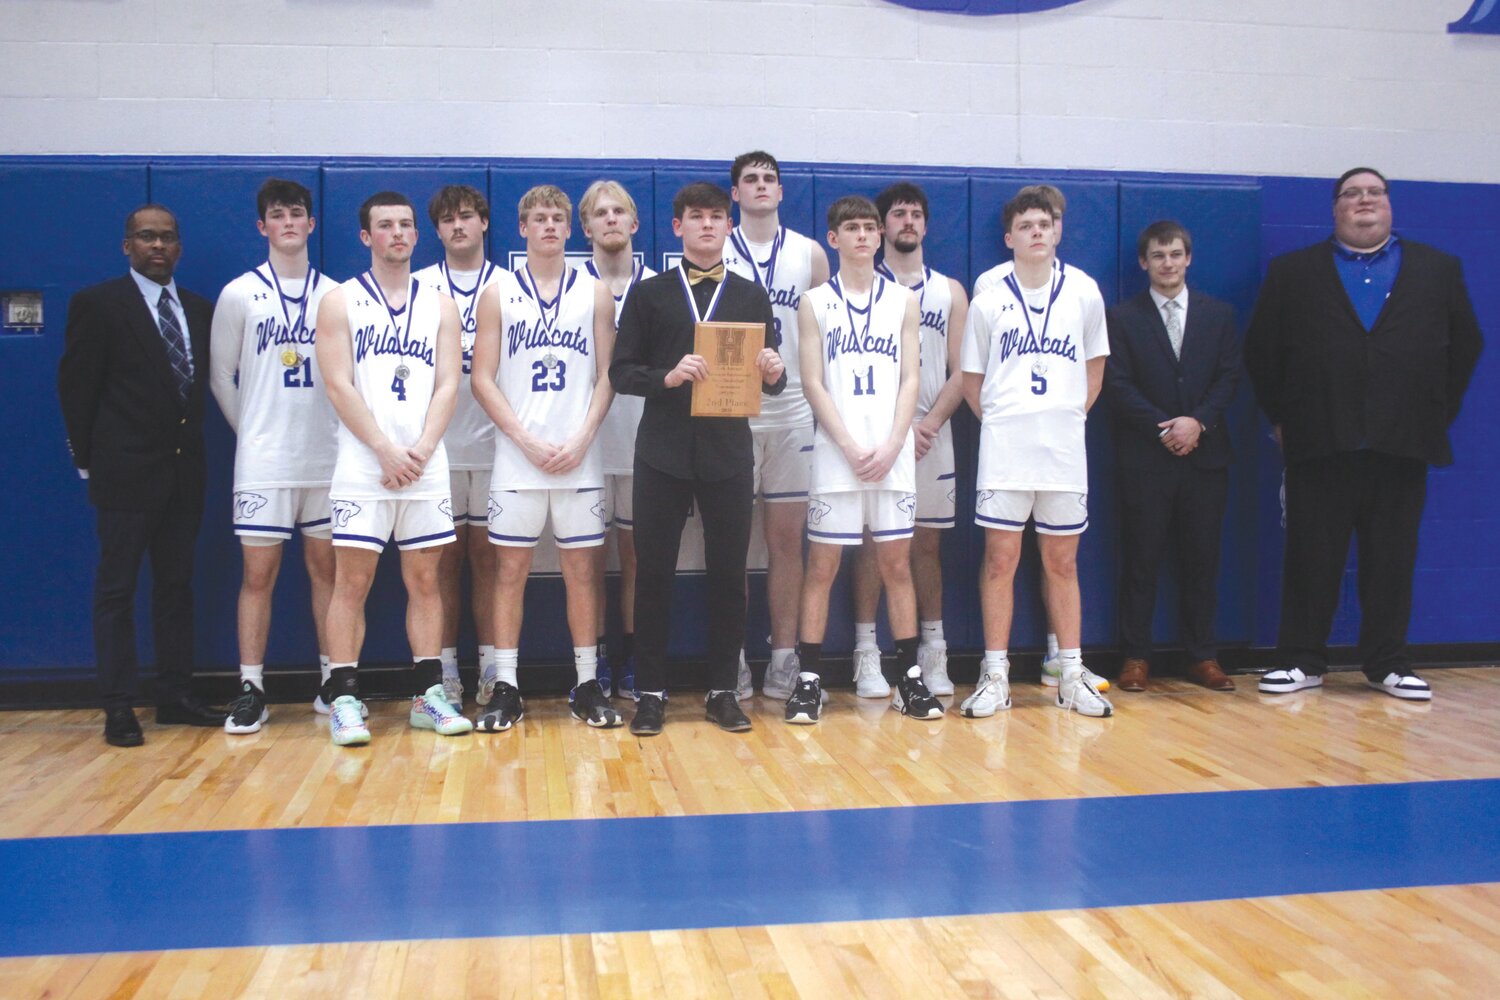 The Montgomery County boys basketball team poses with its second-place plaque after losing to Hermann 46-44 in overtime in the Hermann Invitational championship game on Jan. 27. Pictured are, front row from left, Cade Smith, Chase Queathem, Mason Leu, Seth Walton and Jay Rodgers. Back row are volunteer assistant coach Ron Williams, Jake Stellwagen, Maddox James, Tyler Erwin, Clayton Parker, Tatum Wessel, Sean Rodgers, head coach Scott Kroeger and assistant coach Dustin Figg.